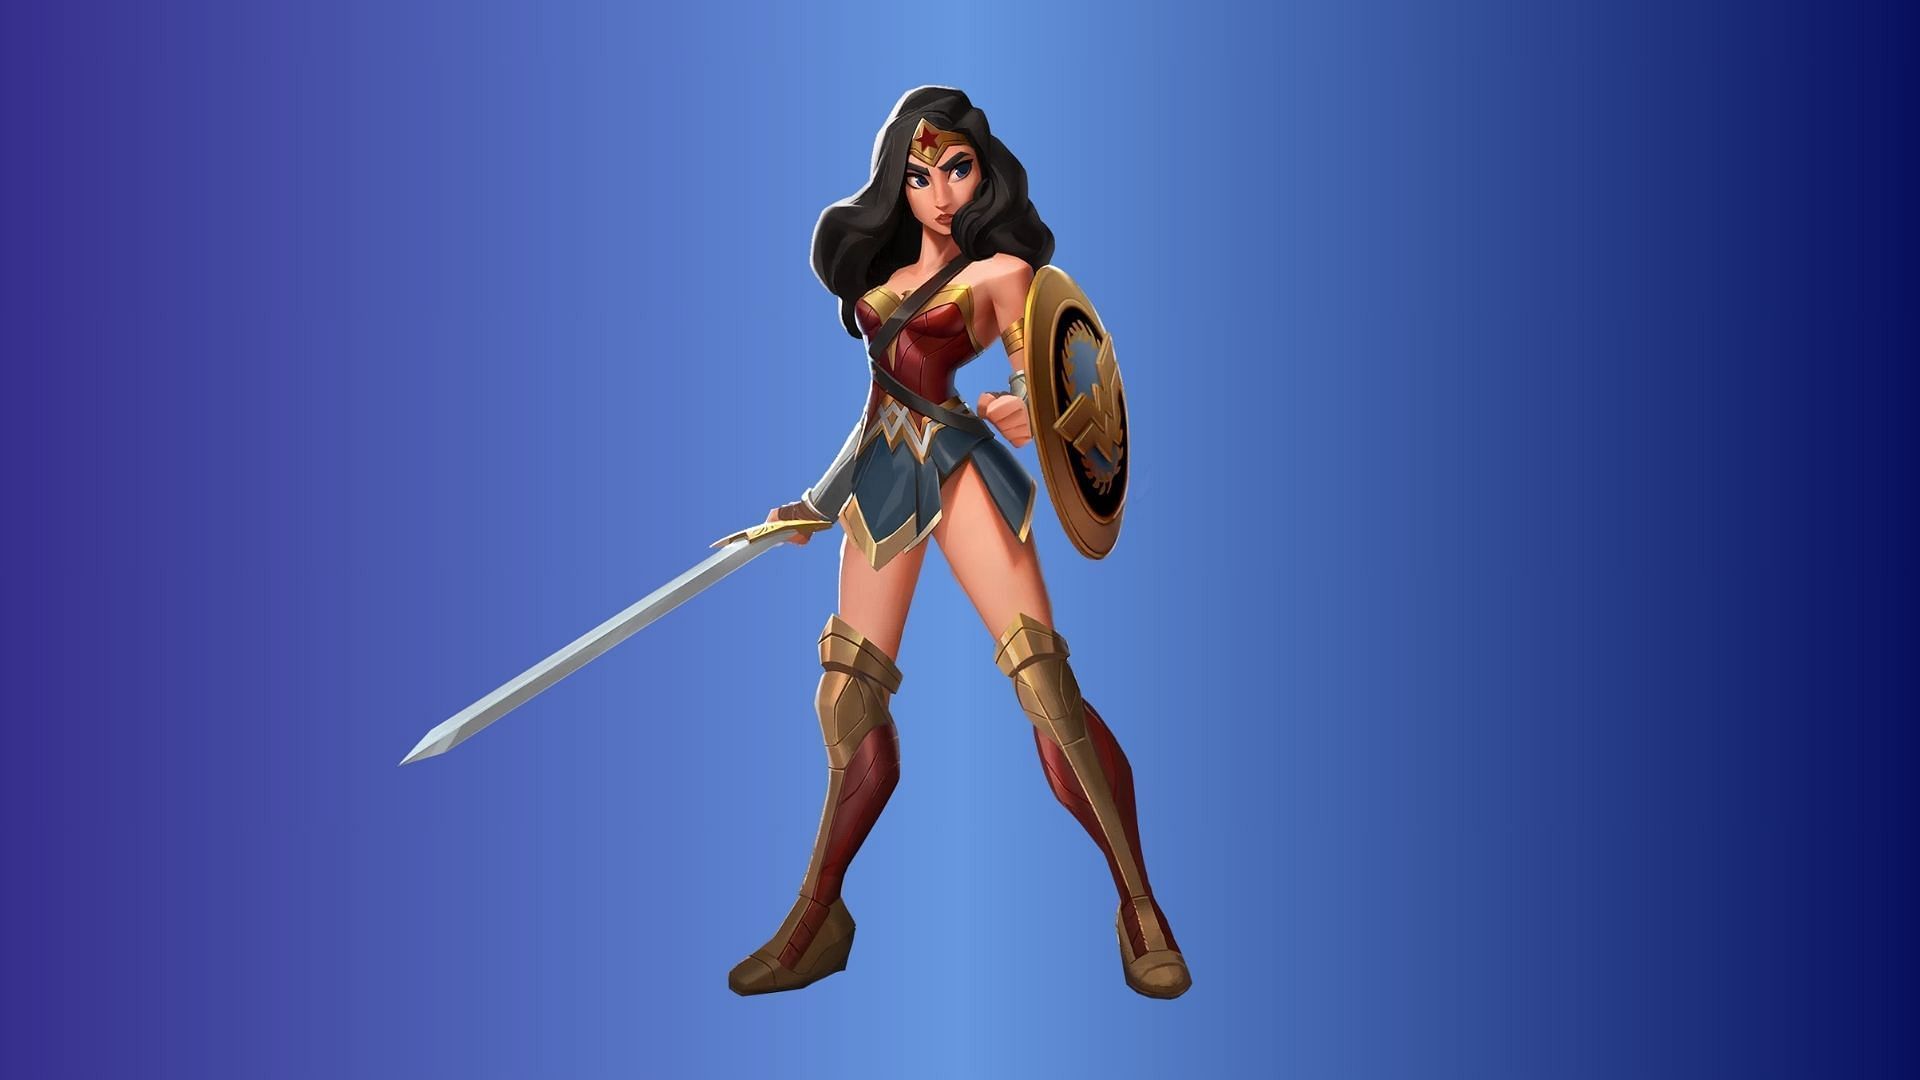 Wonder Woman has a long-range whip that can pull opponents (Image via Warner Bros)